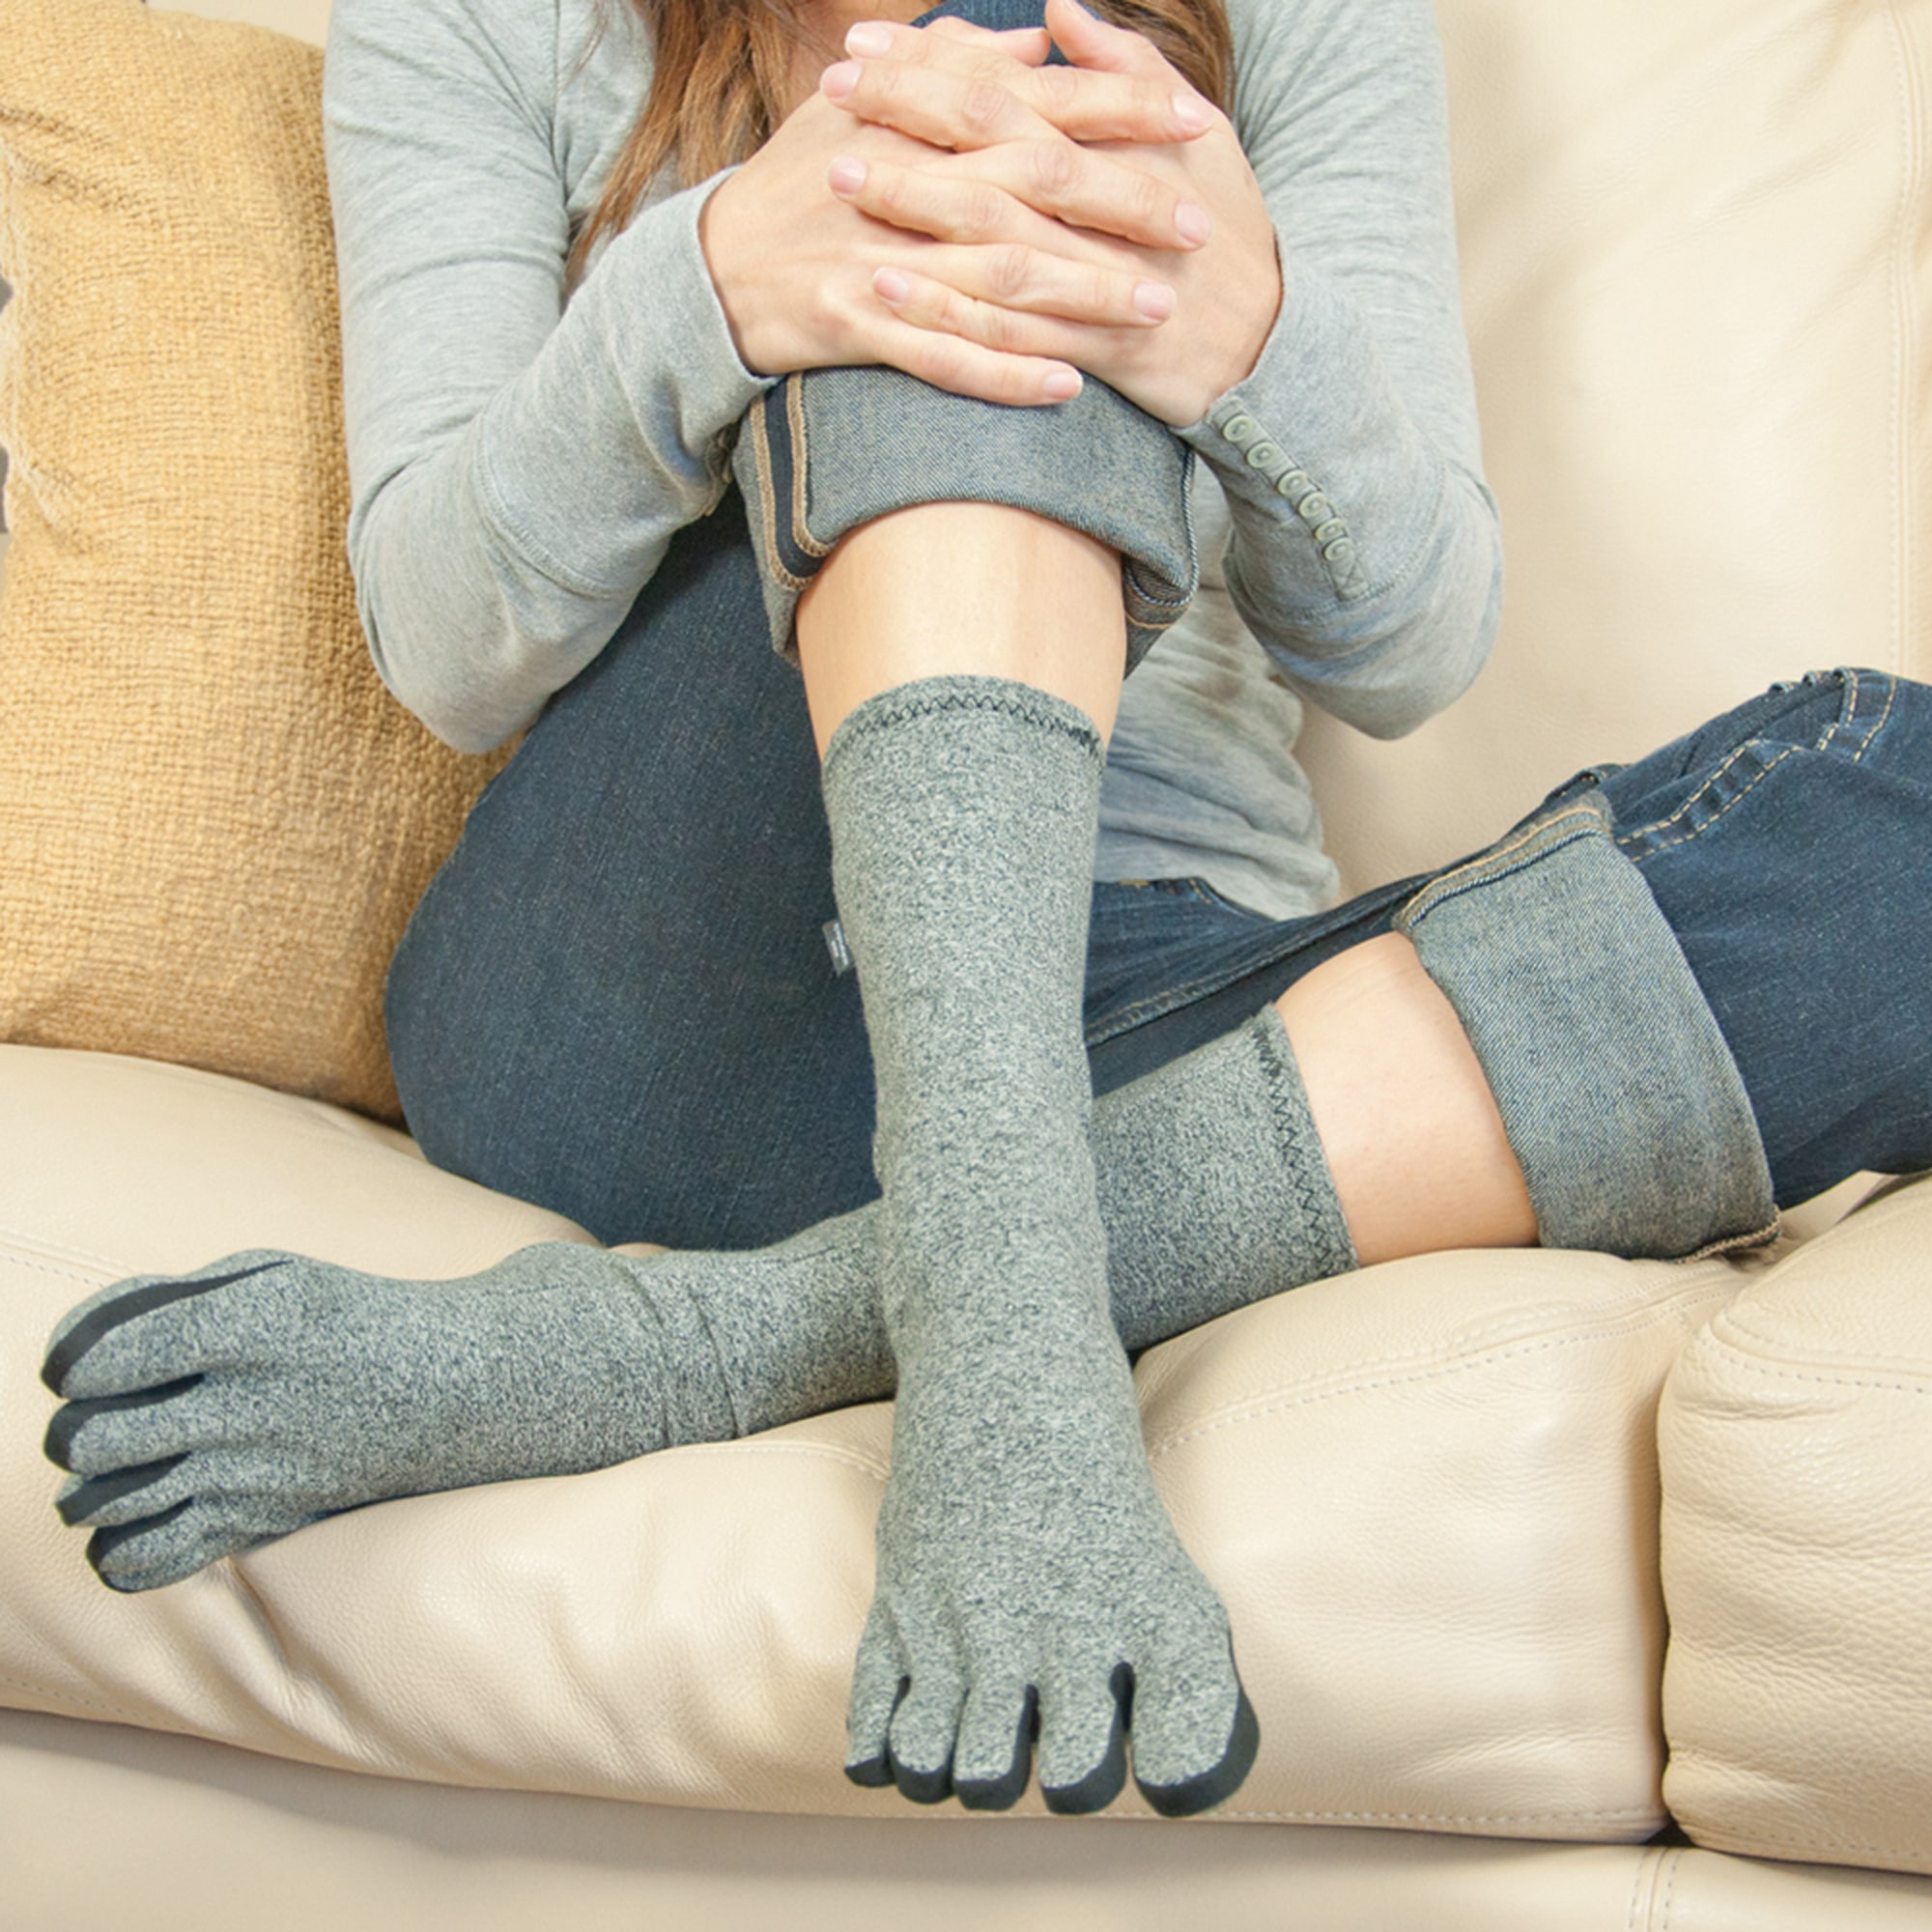 Arthritis Sock - Arthritis Supports Australia: Quality Support Products for  Arthritis Relief